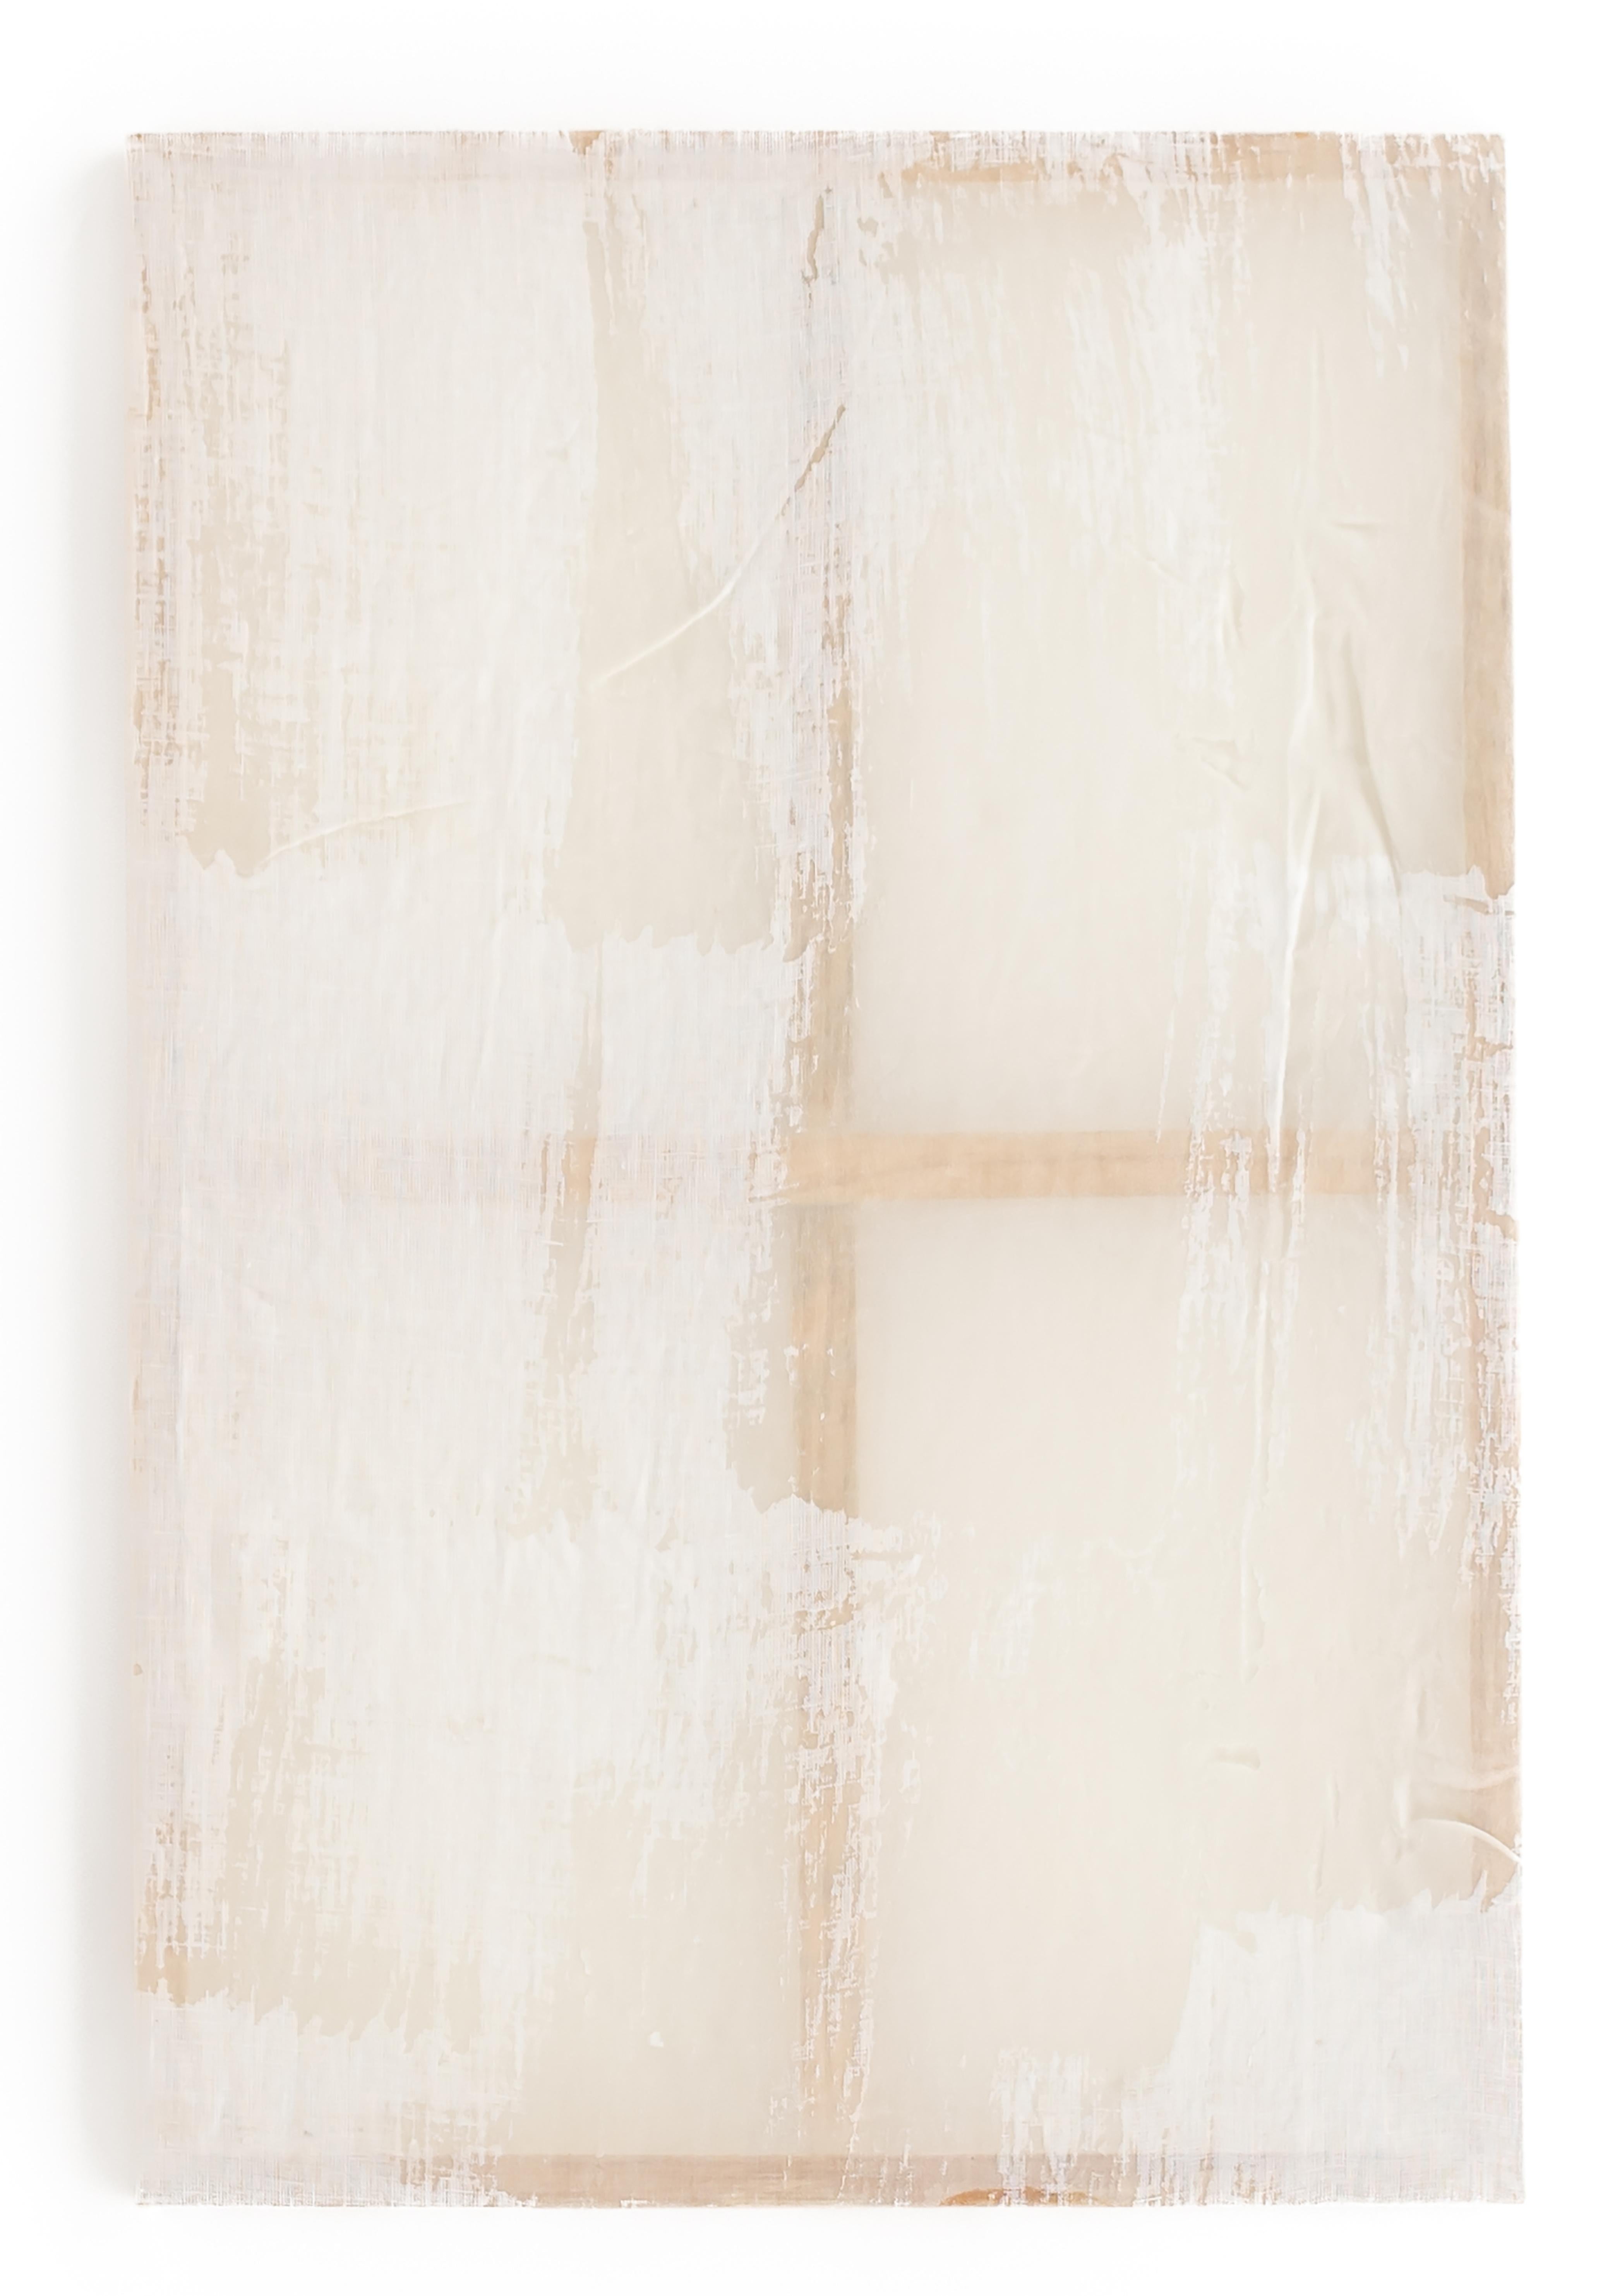 Cristina Loya Domingo Abstract Painting - UNTITLED 0.8 – wax on linen, natural materials, ecologies, minimal/abstract scre